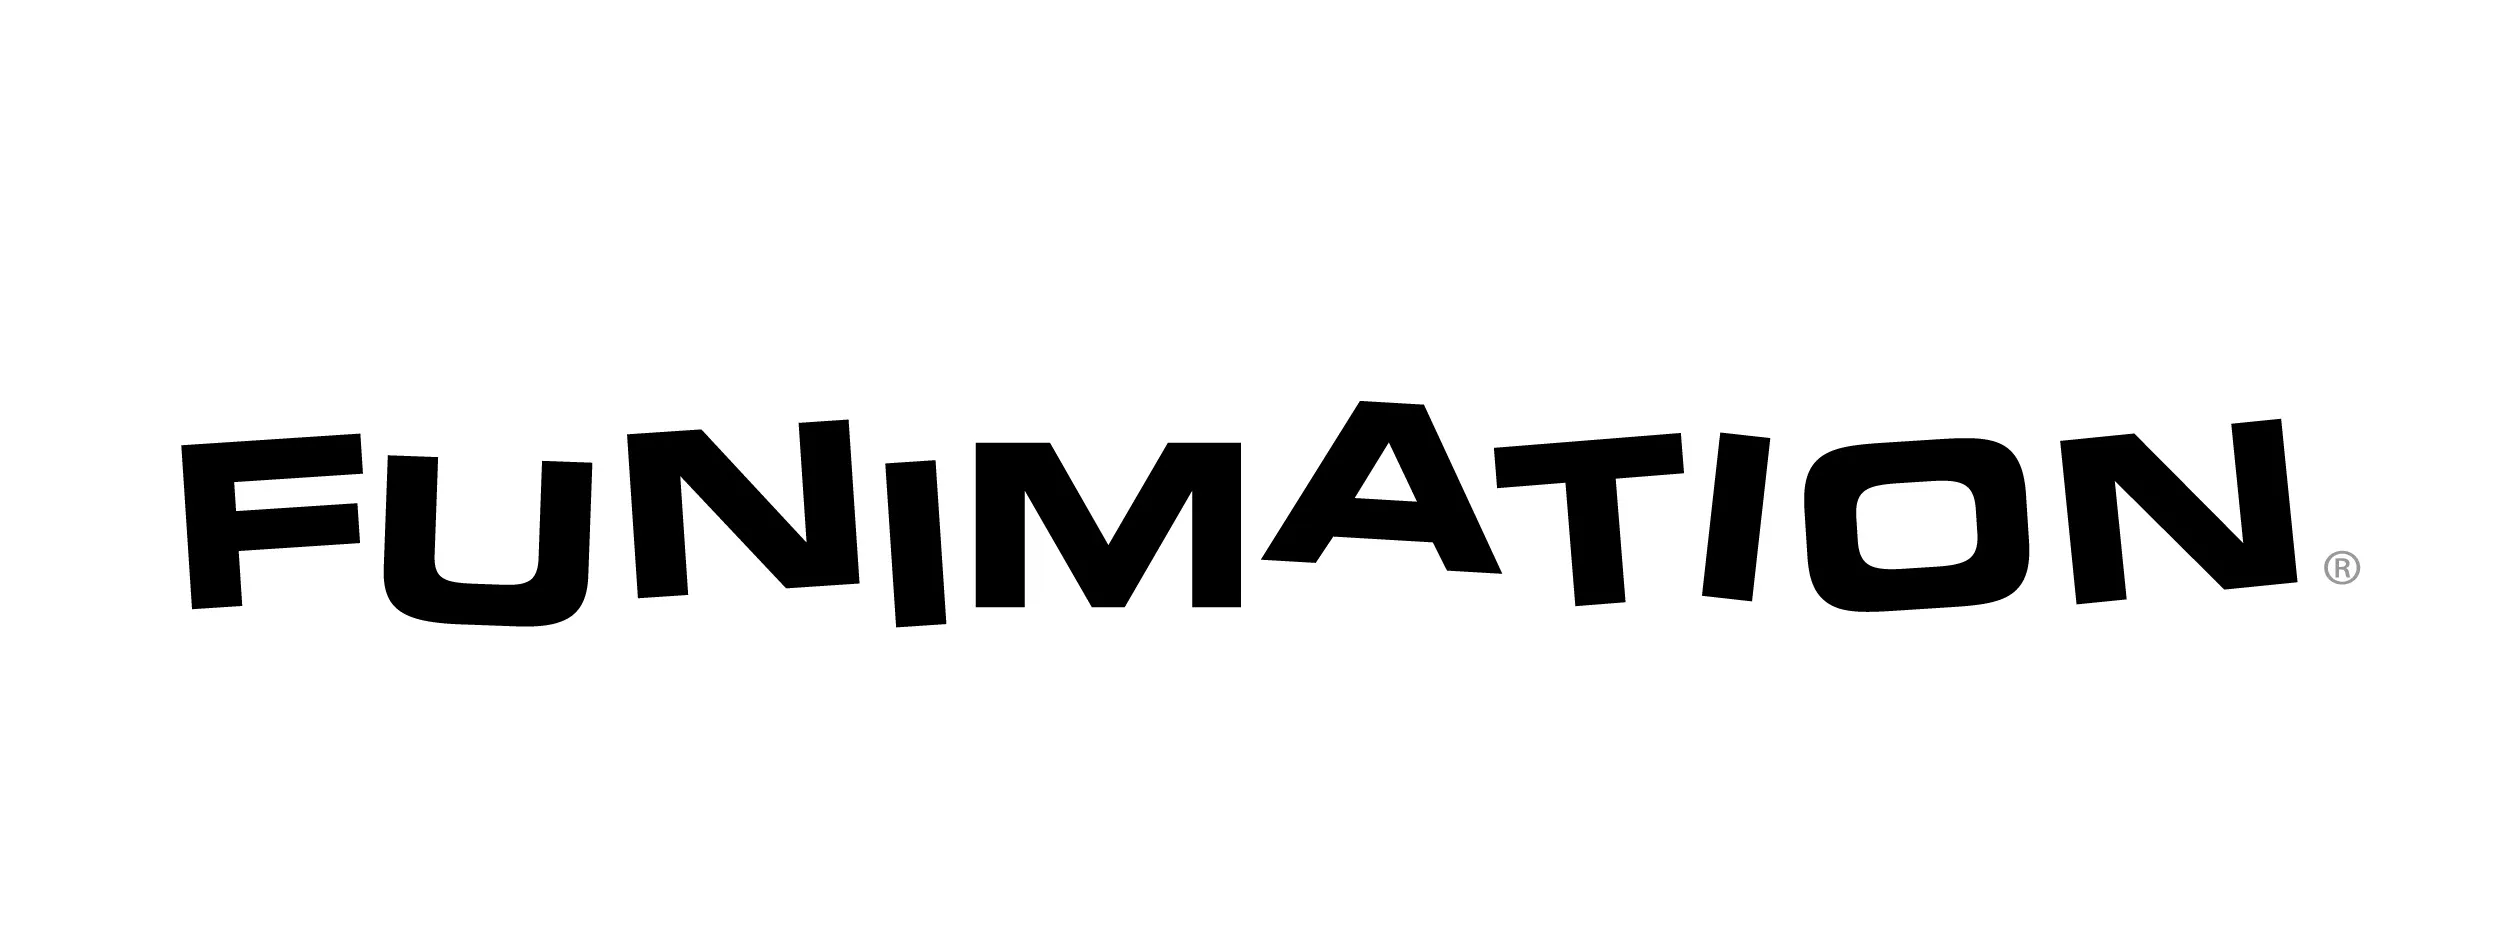 Sony Pictures adquiere Funimation